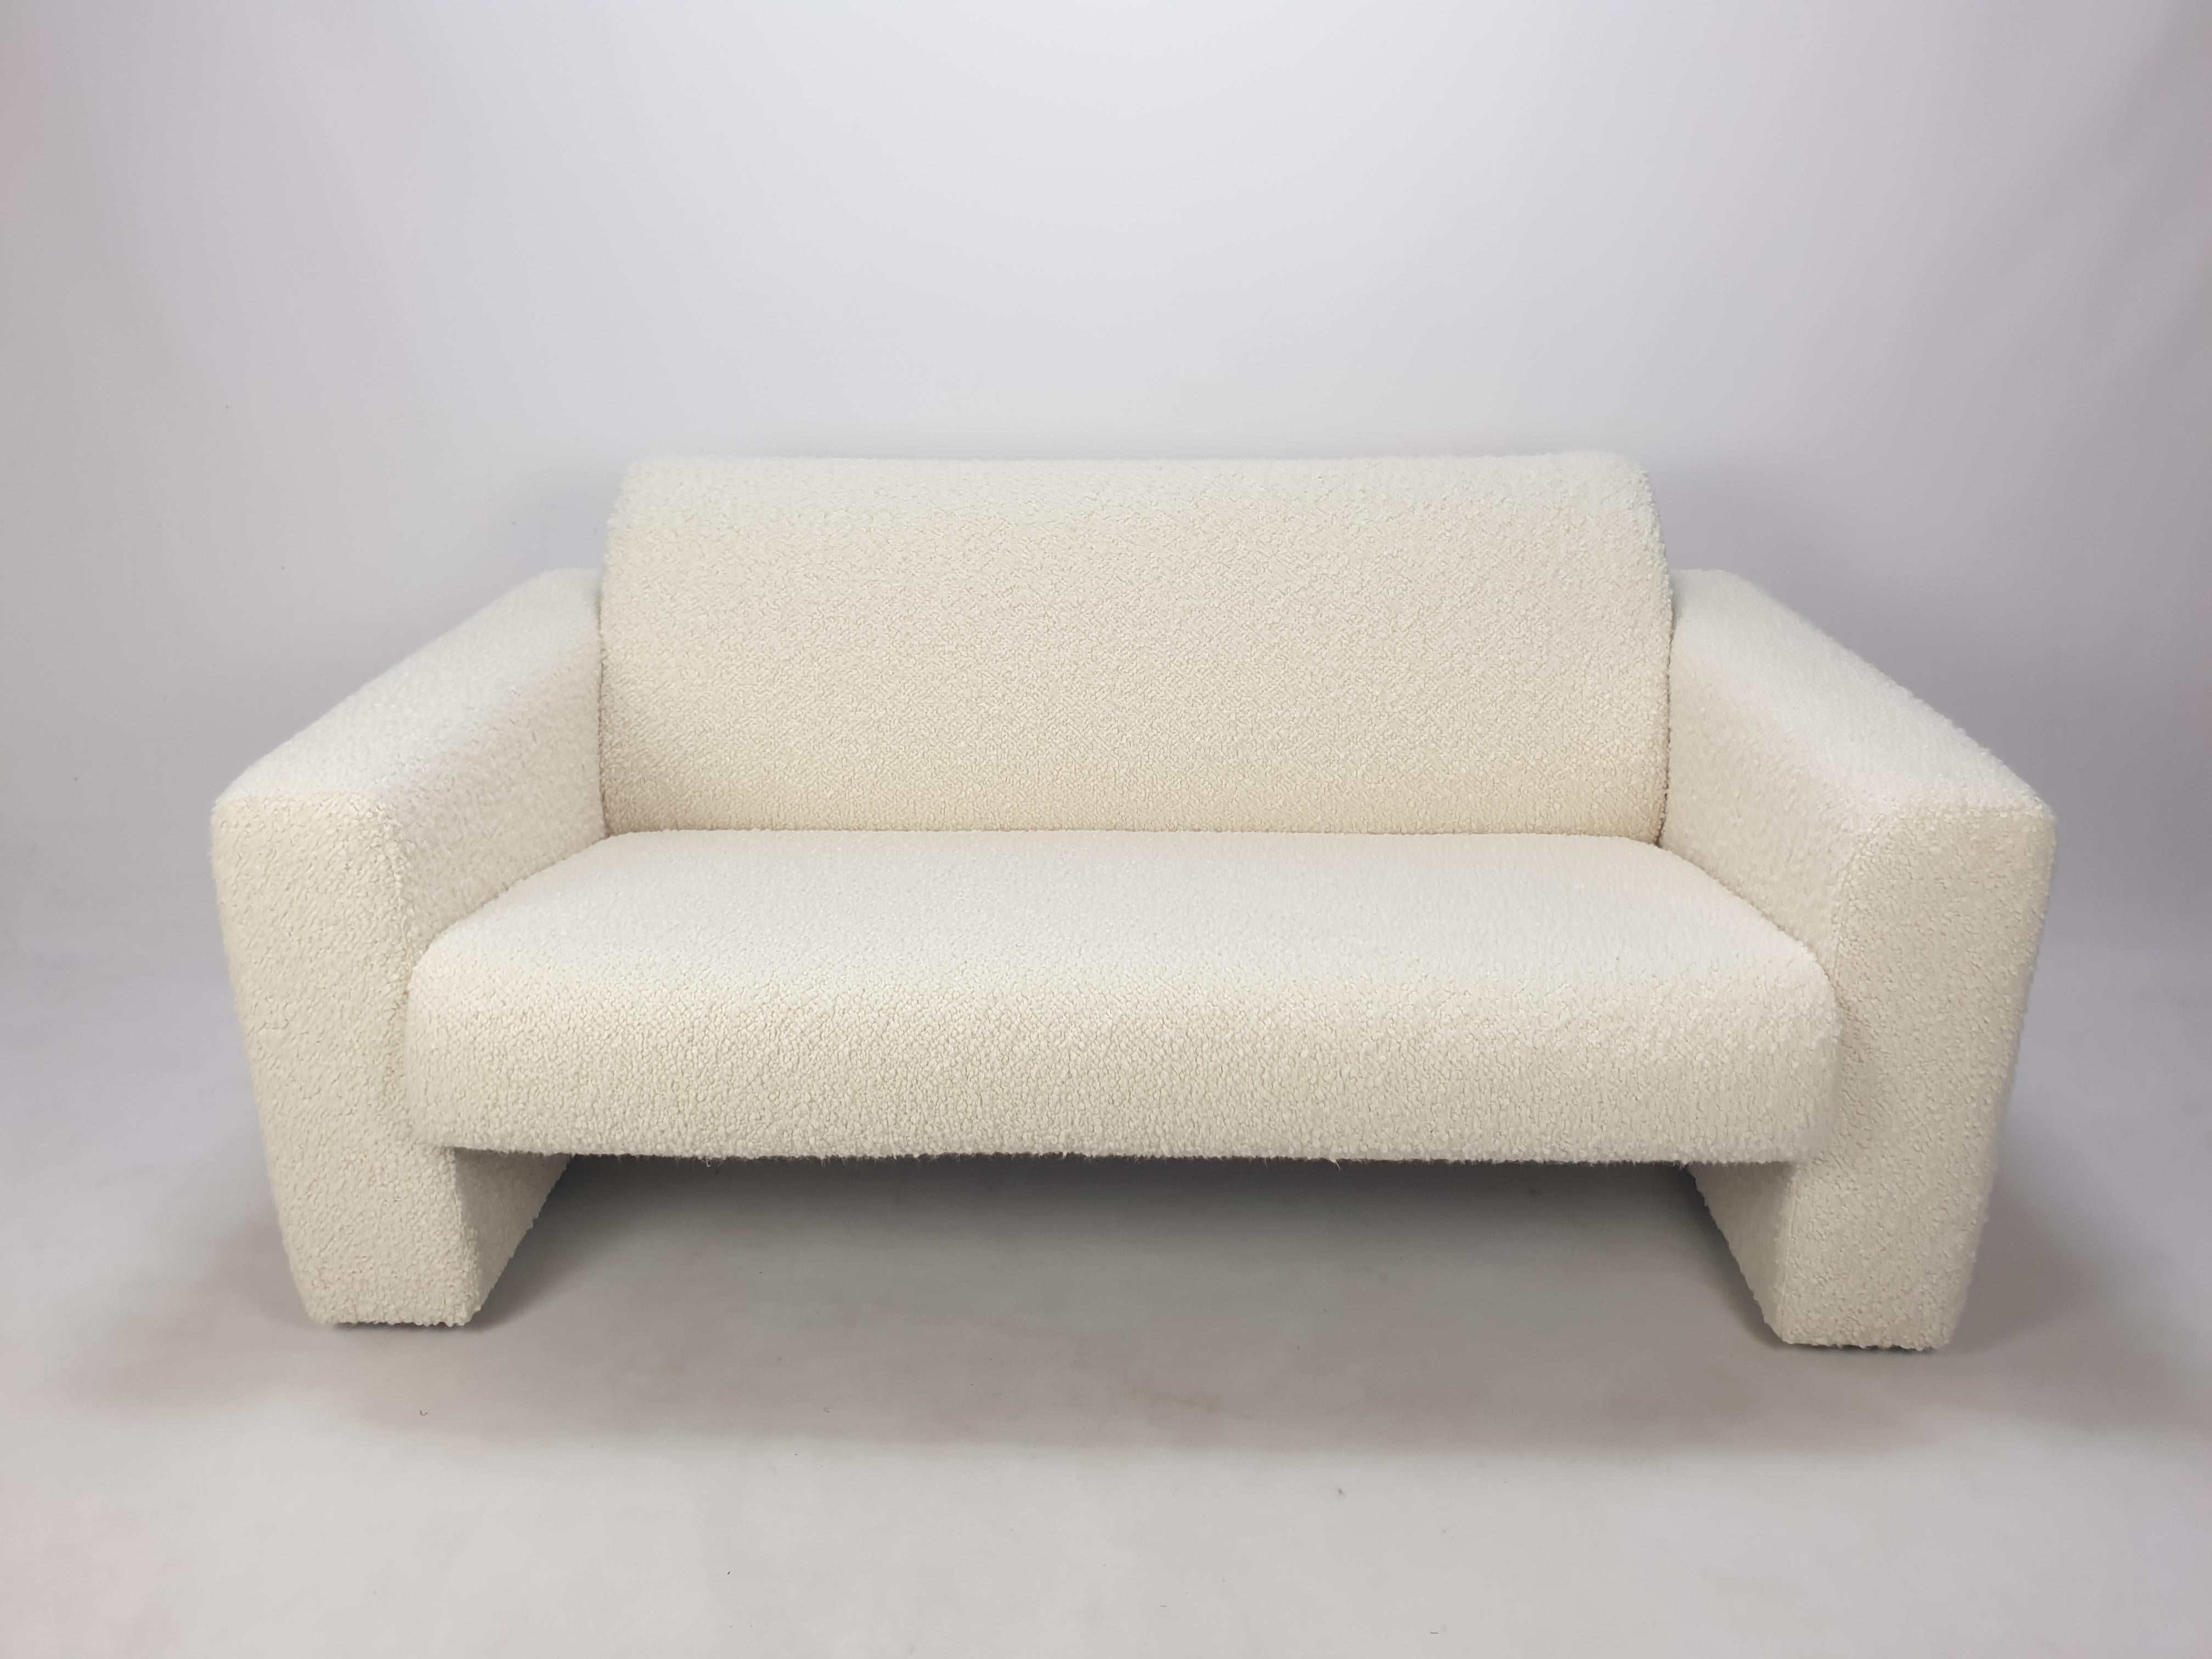 1980s couch for sale